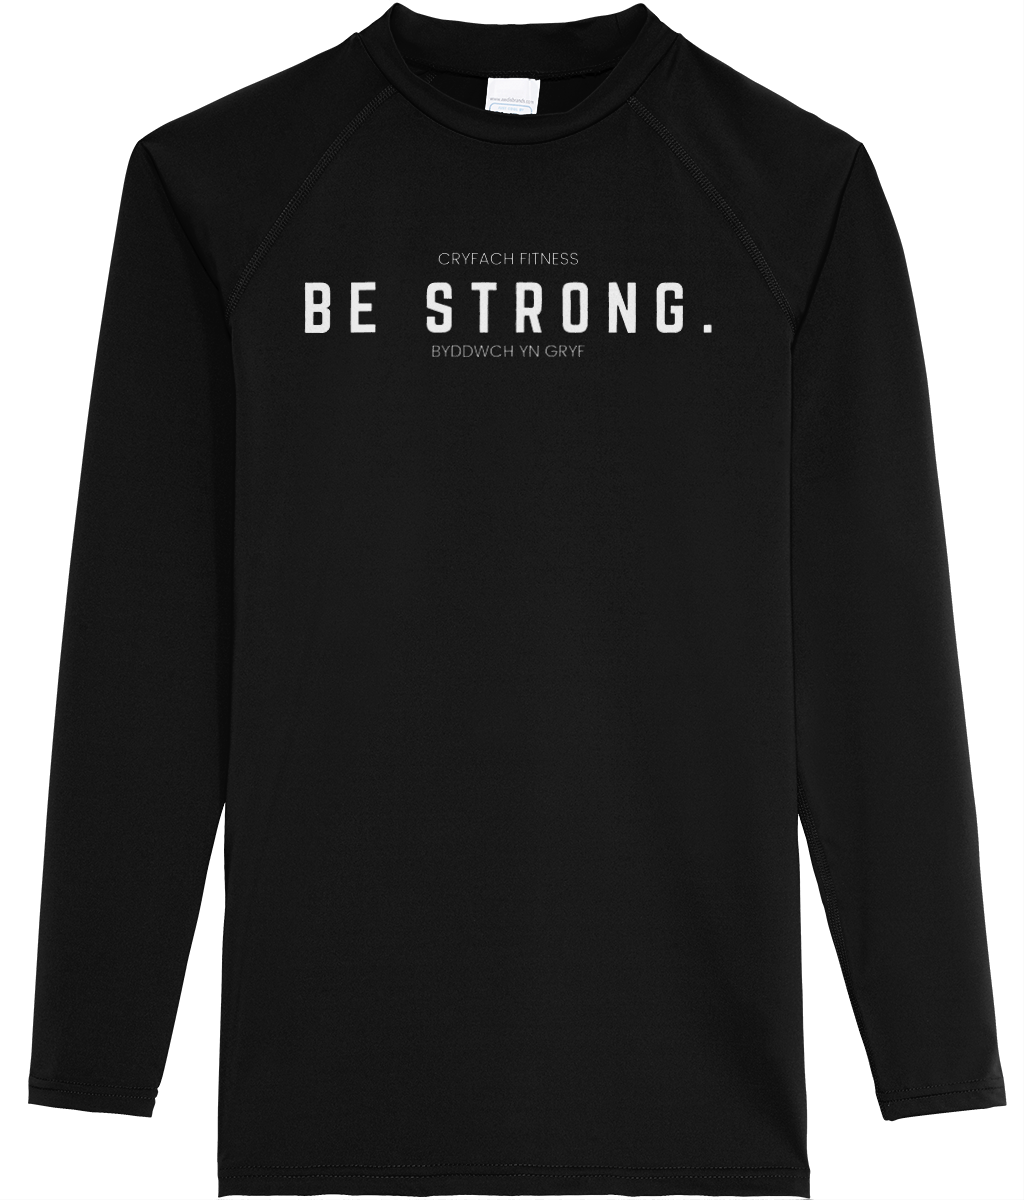 BE STRONG LONG SLEEVE PERFORMANCE TOP